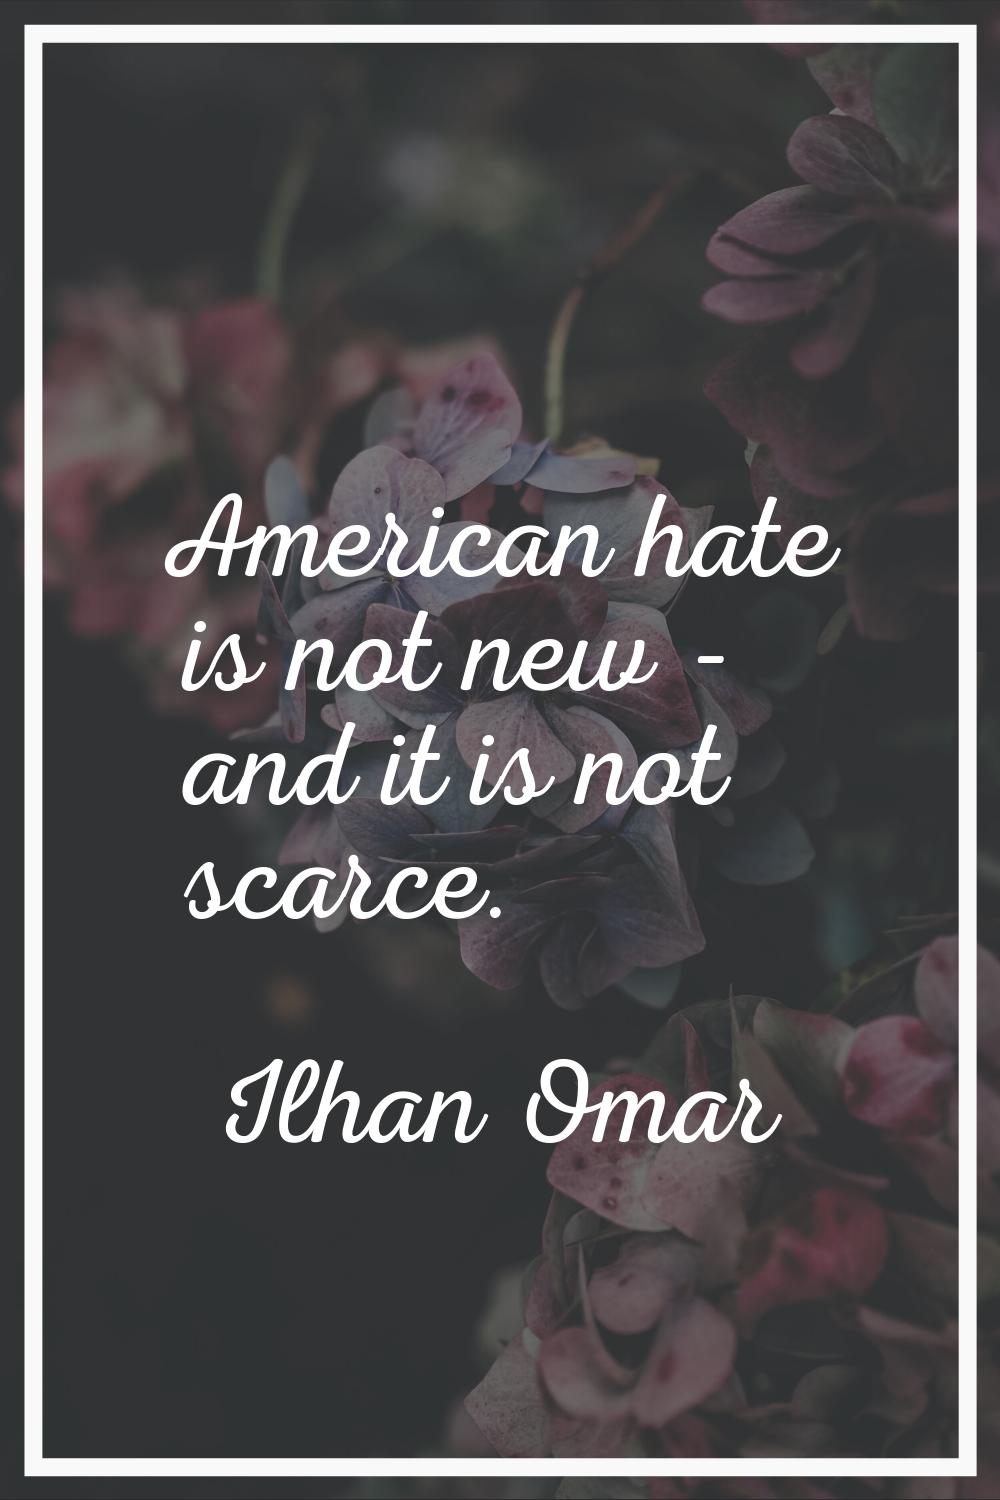 American hate is not new - and it is not scarce.